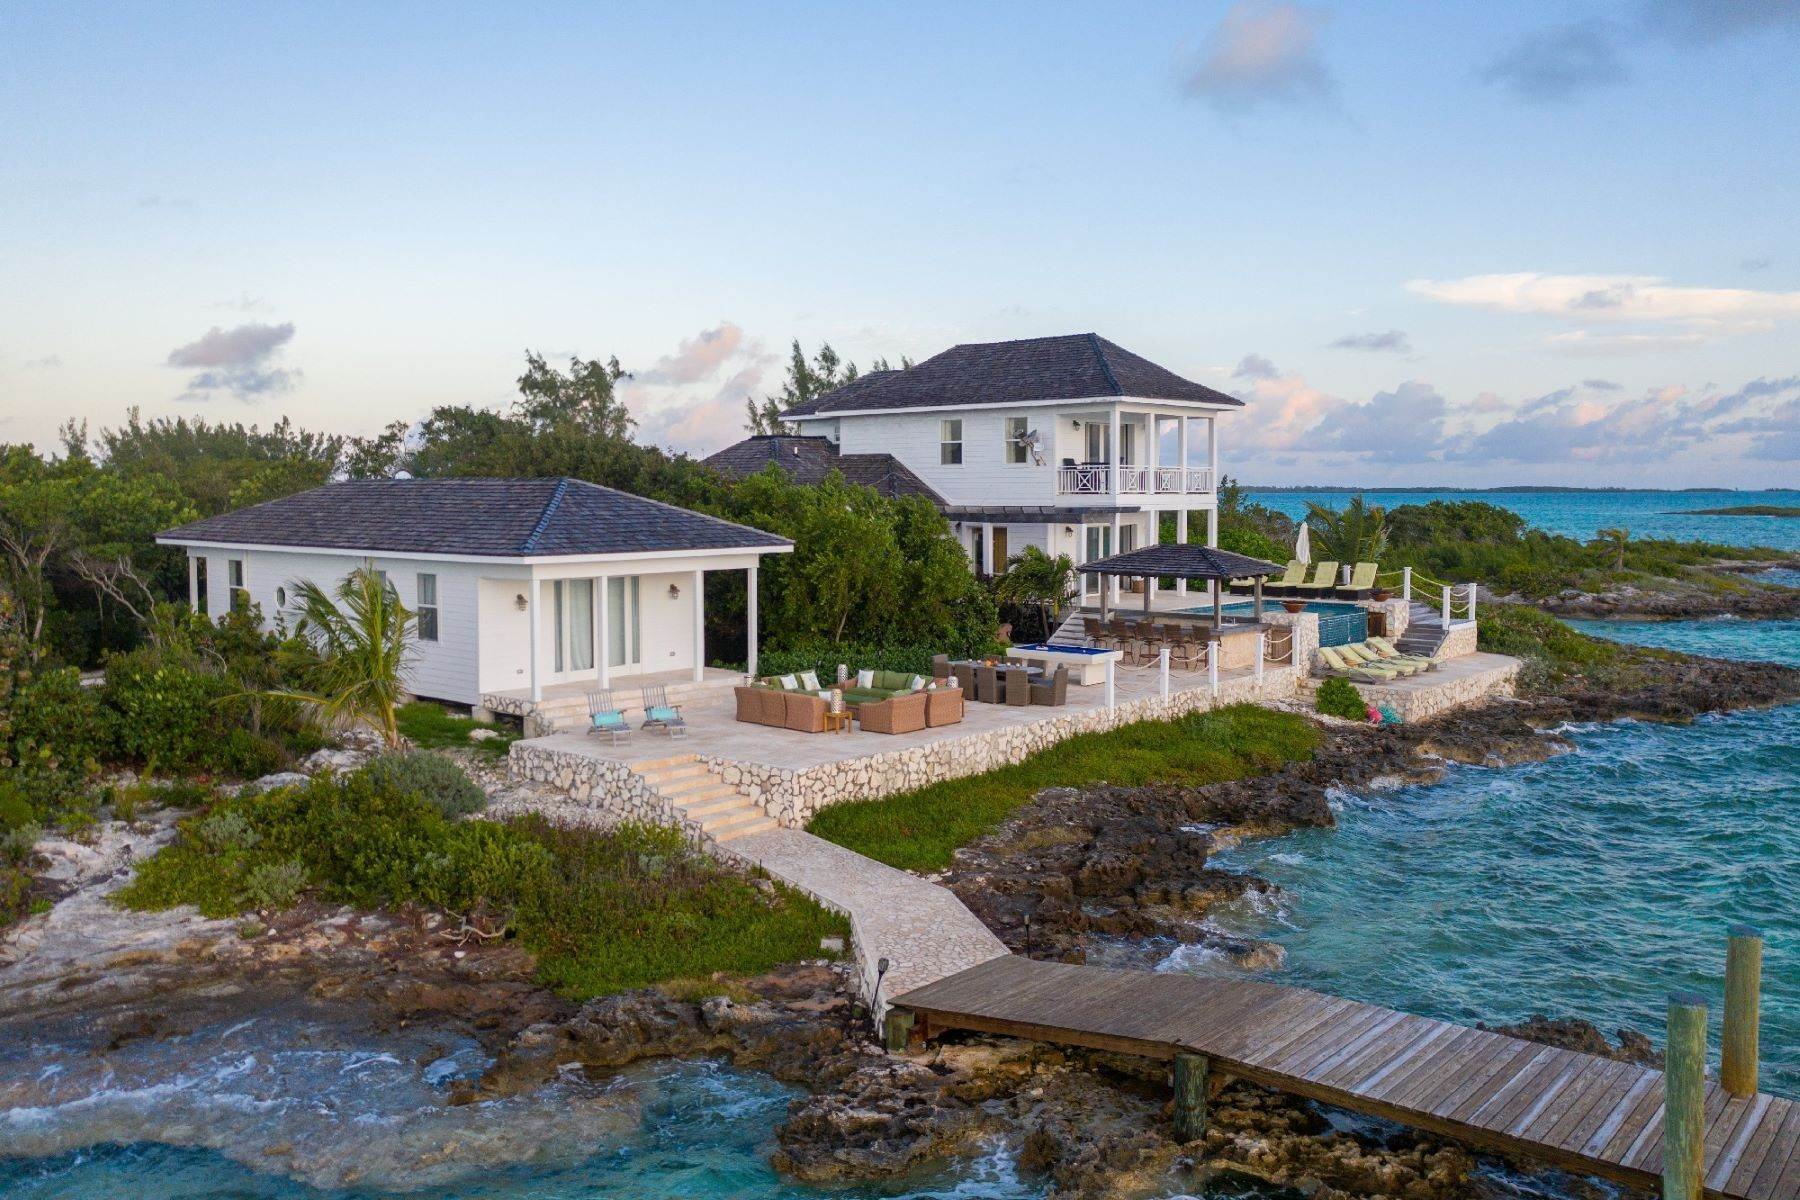 12. Private Islands for Sale at Harbour Island, Eleuthera Bahamas